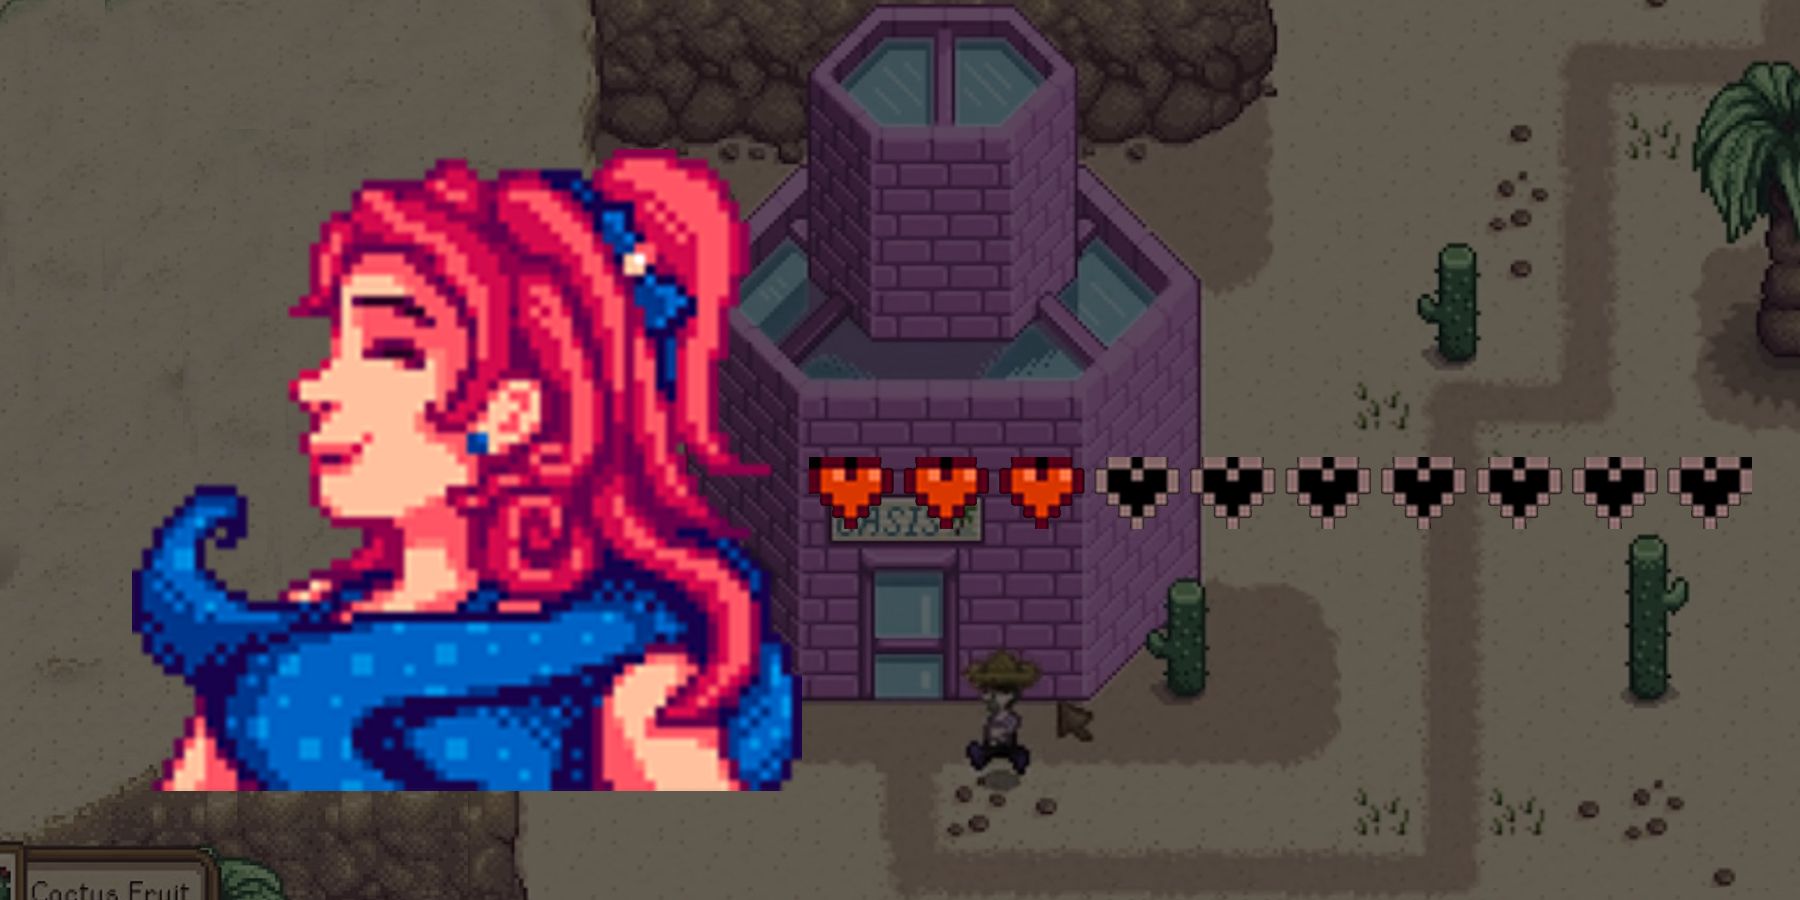 Any Friendship Point Heart Event for Sandy in Stardew Valley